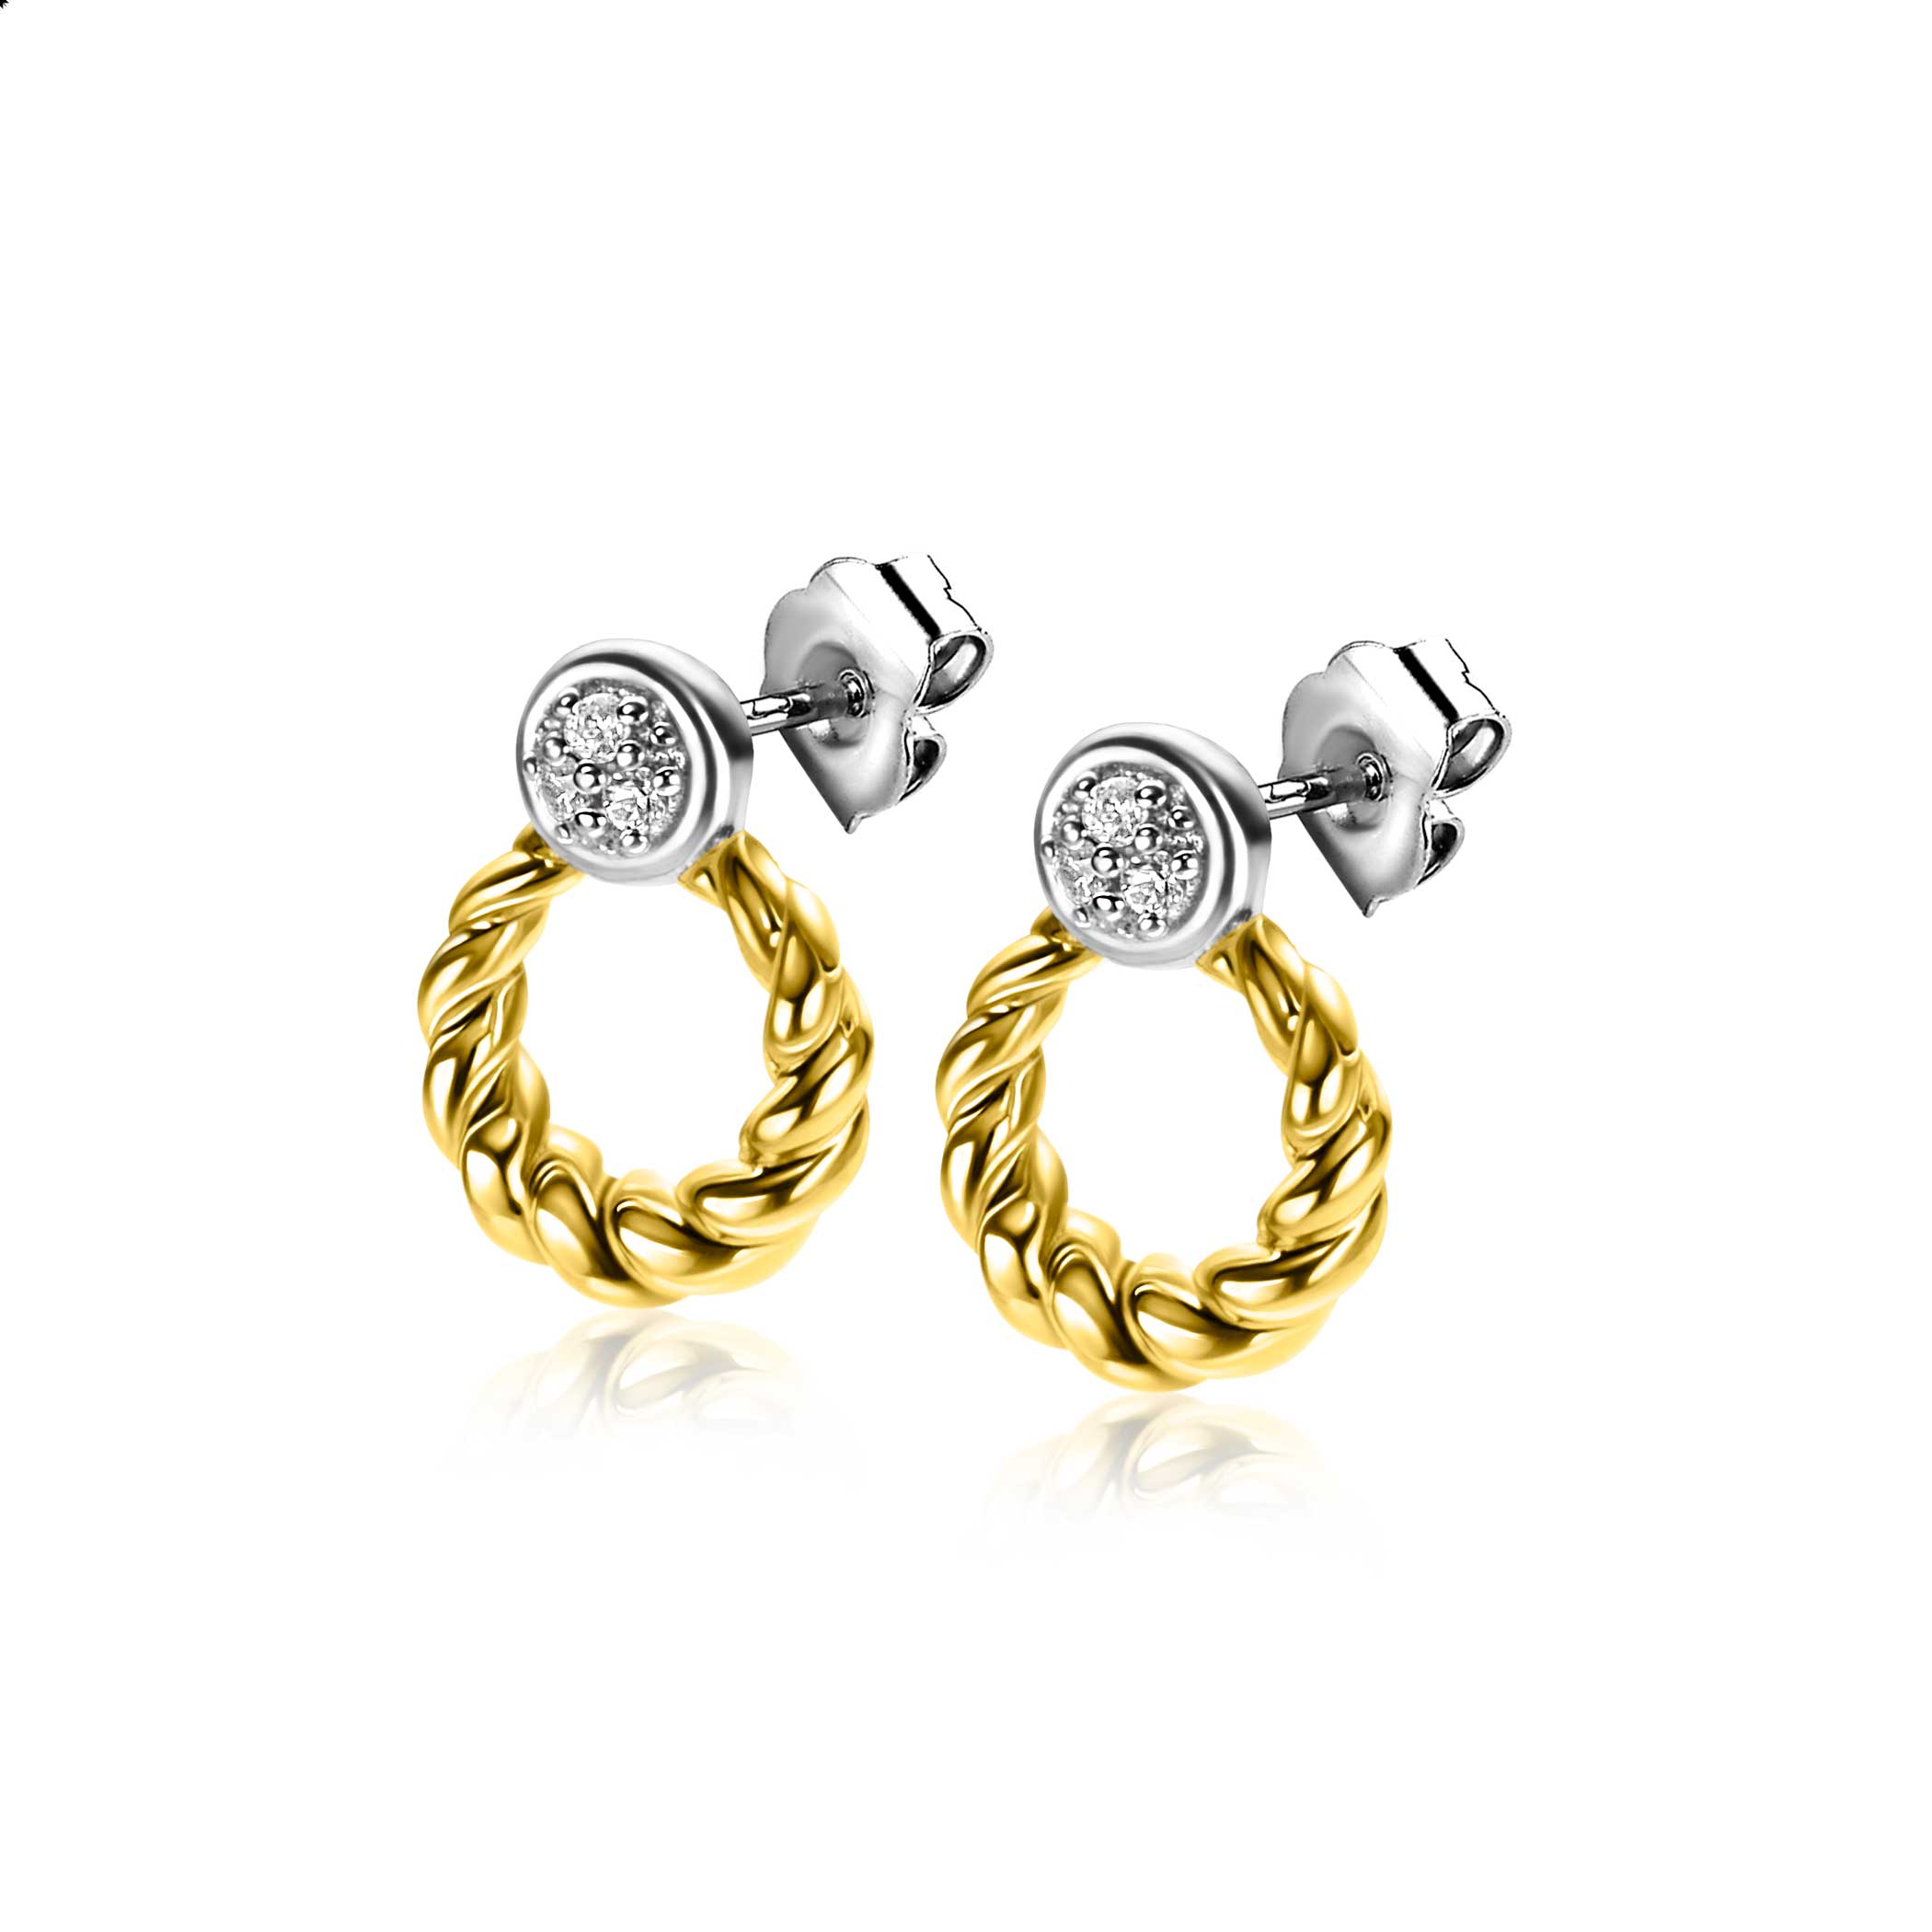 12mm ZINZI Bicolor Sterling Silver Round Stud Earrings Open Circle Twisted Design and White Zirconias ZIO2390Y